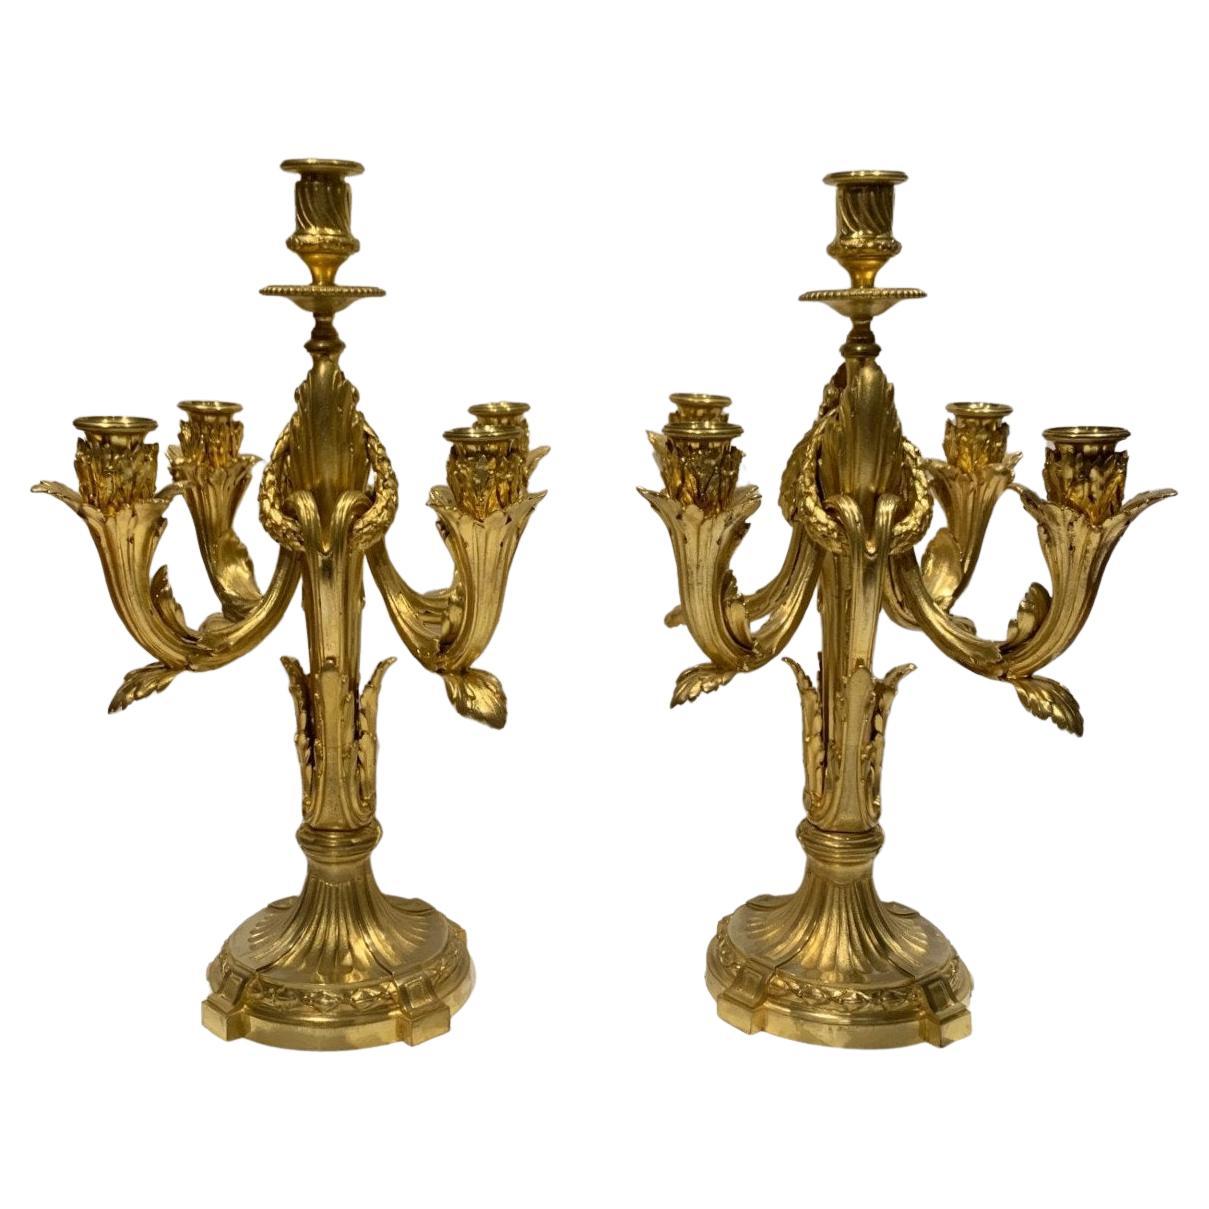 Pair of Bronze Candlesticks 0ctave Lelièvre and Susse Frères For Sale